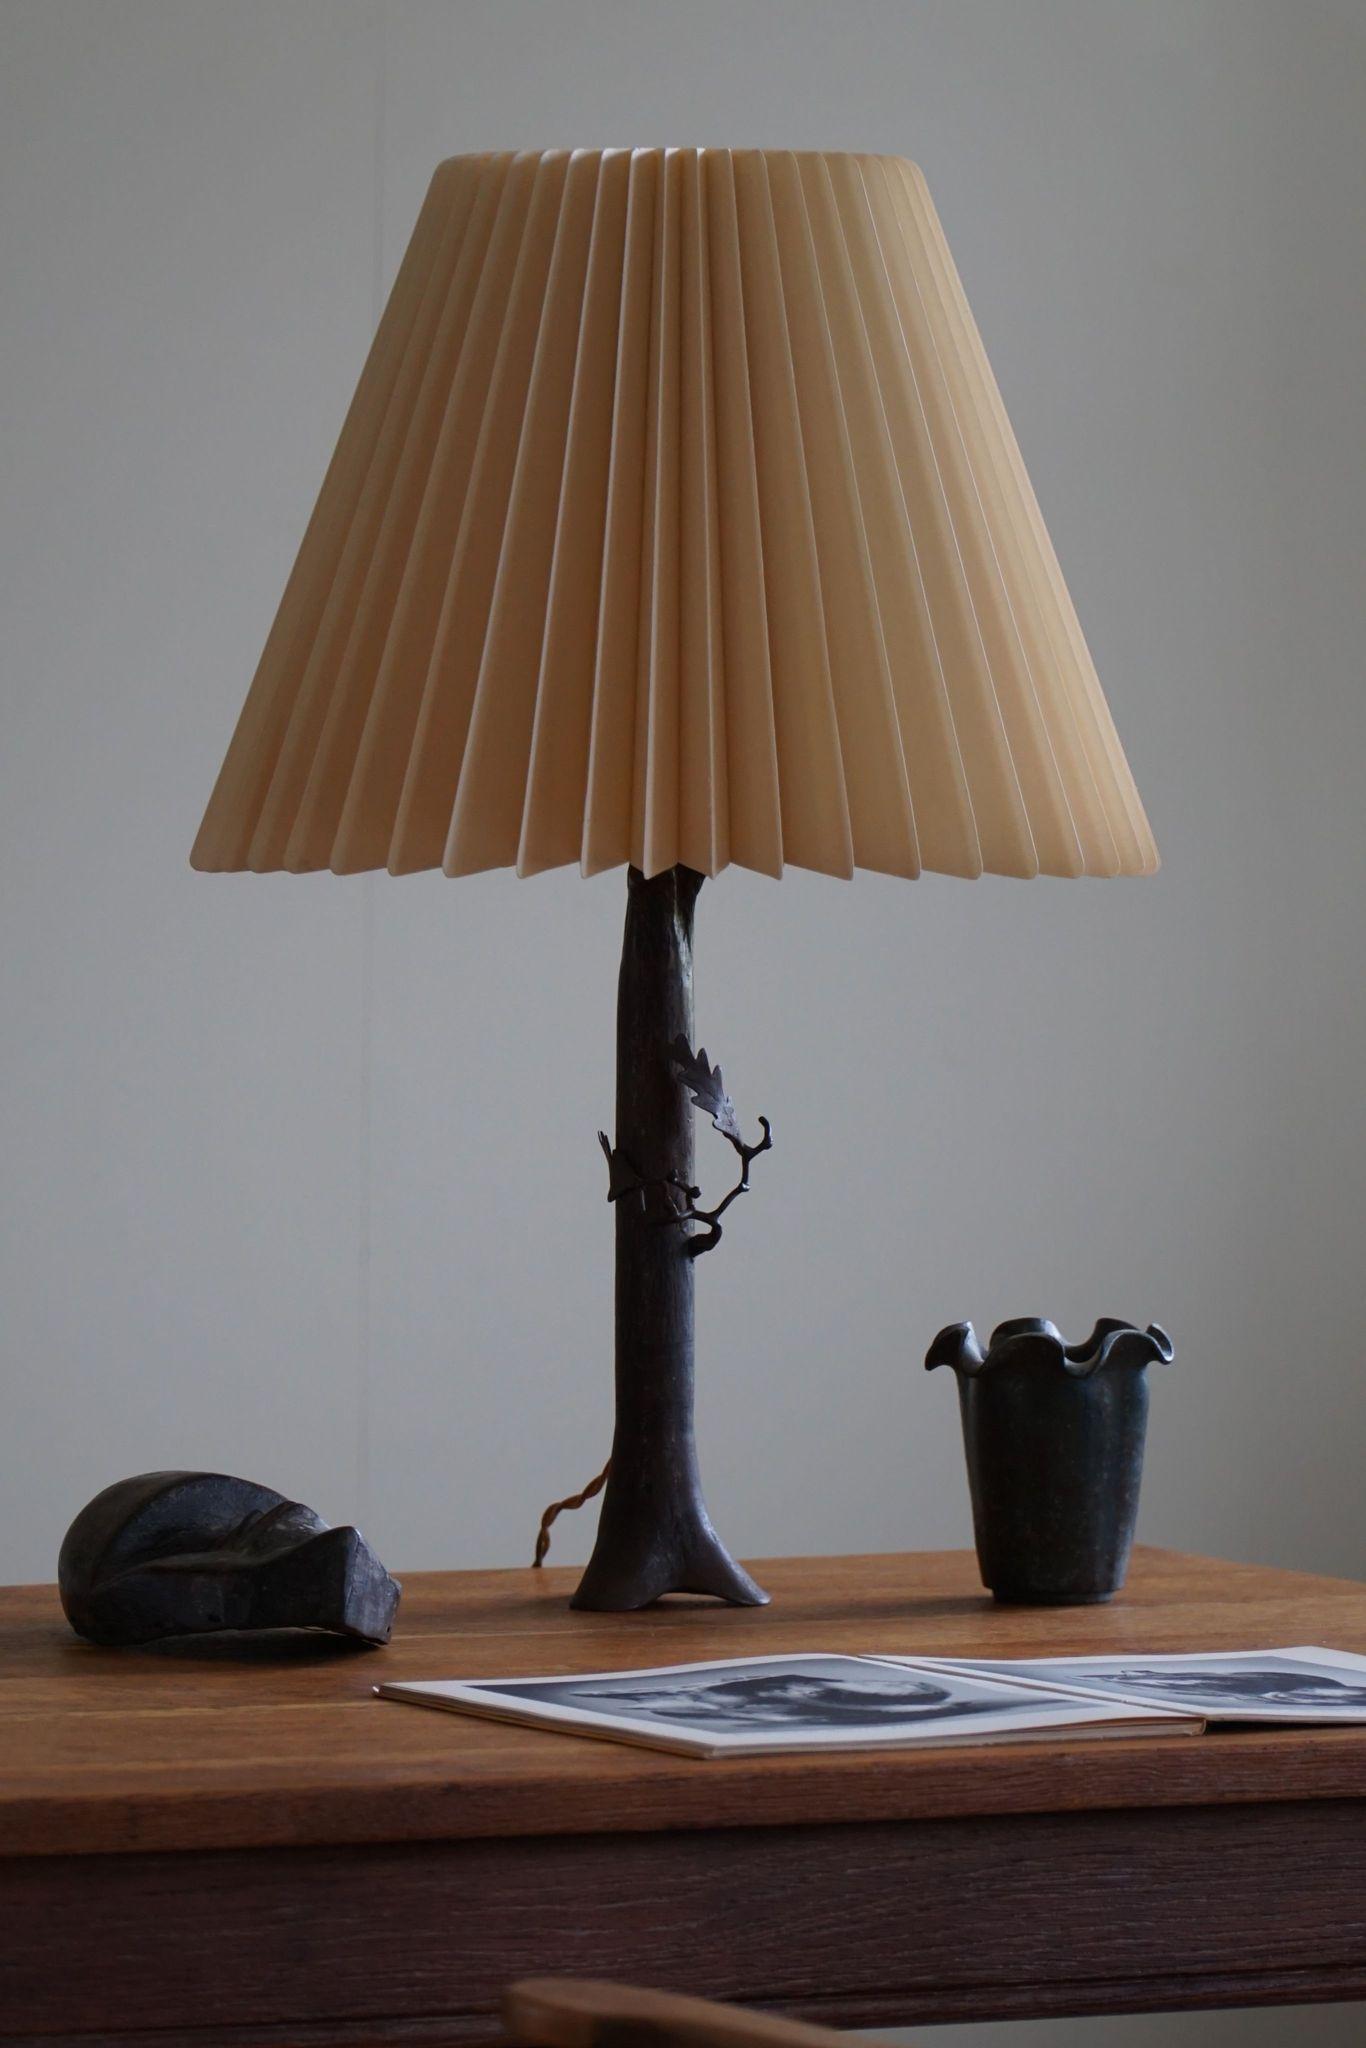 Presenting a charming Danish Jugendstil table lamp that captures the essence of nature's beauty in exquisite bronze craftsmanship. Crafted by the skilled hands of Johannes Christensen in the 1920s, this lamp is a delightful fusion of Art Nouveau